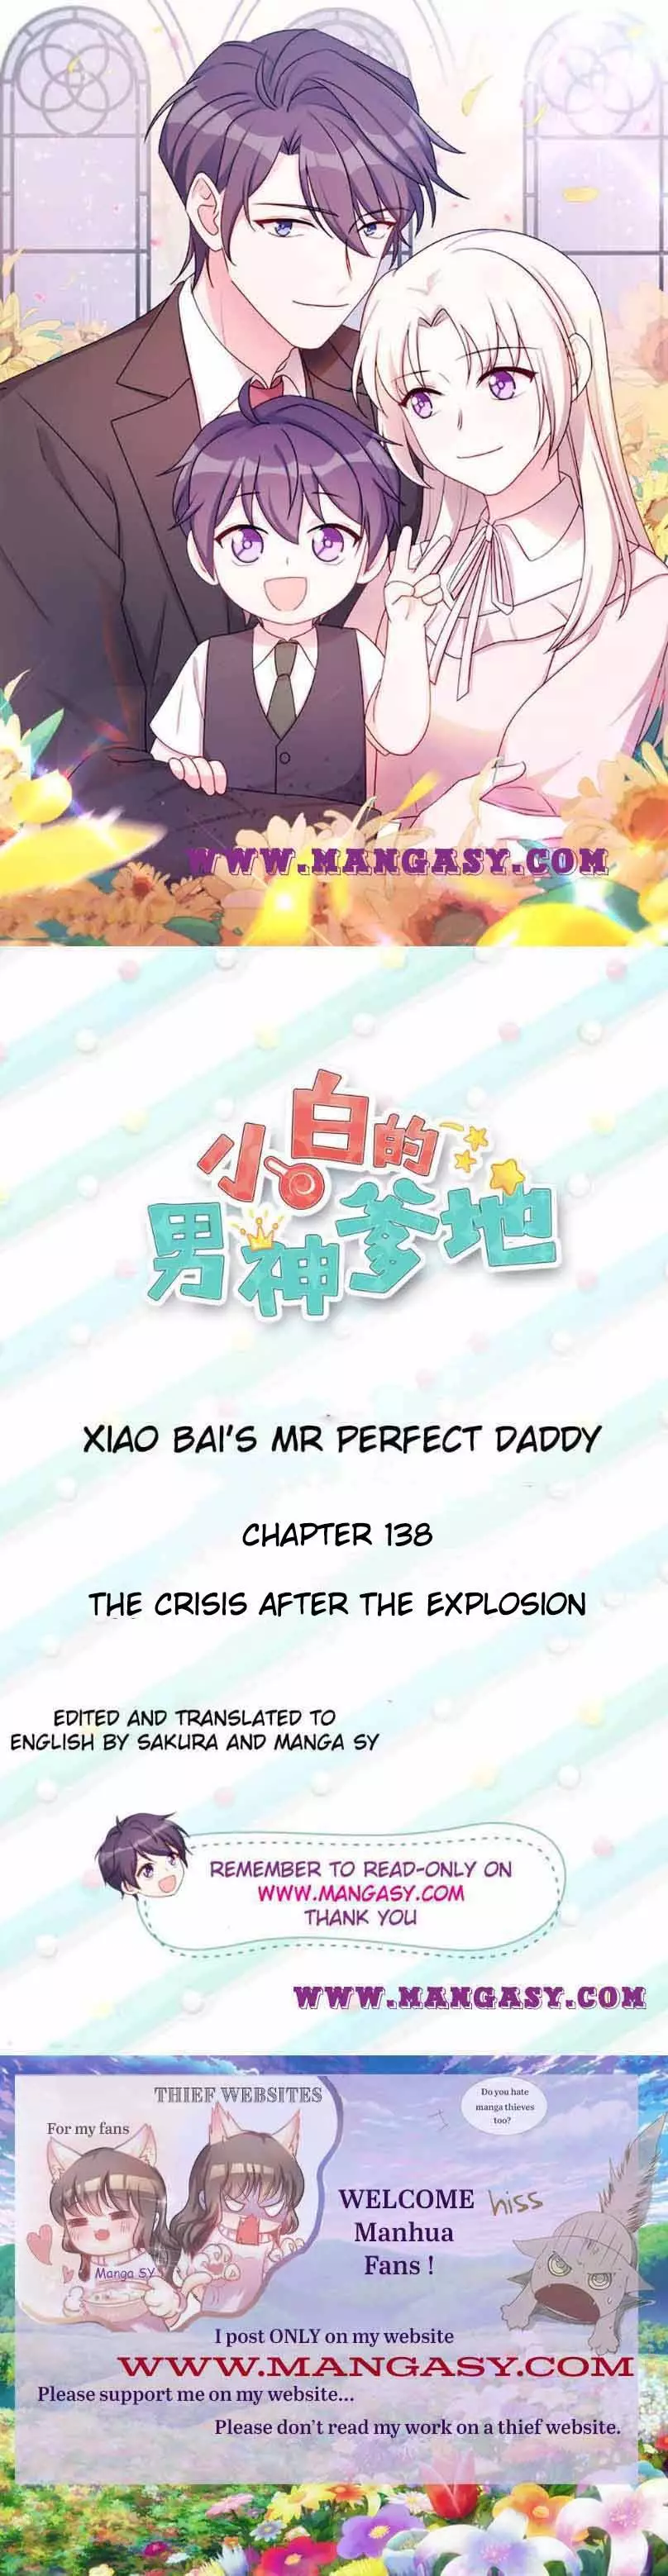 Xiao Bai’S Father Is A Wonderful Person - 138 page 1-ca6acc13